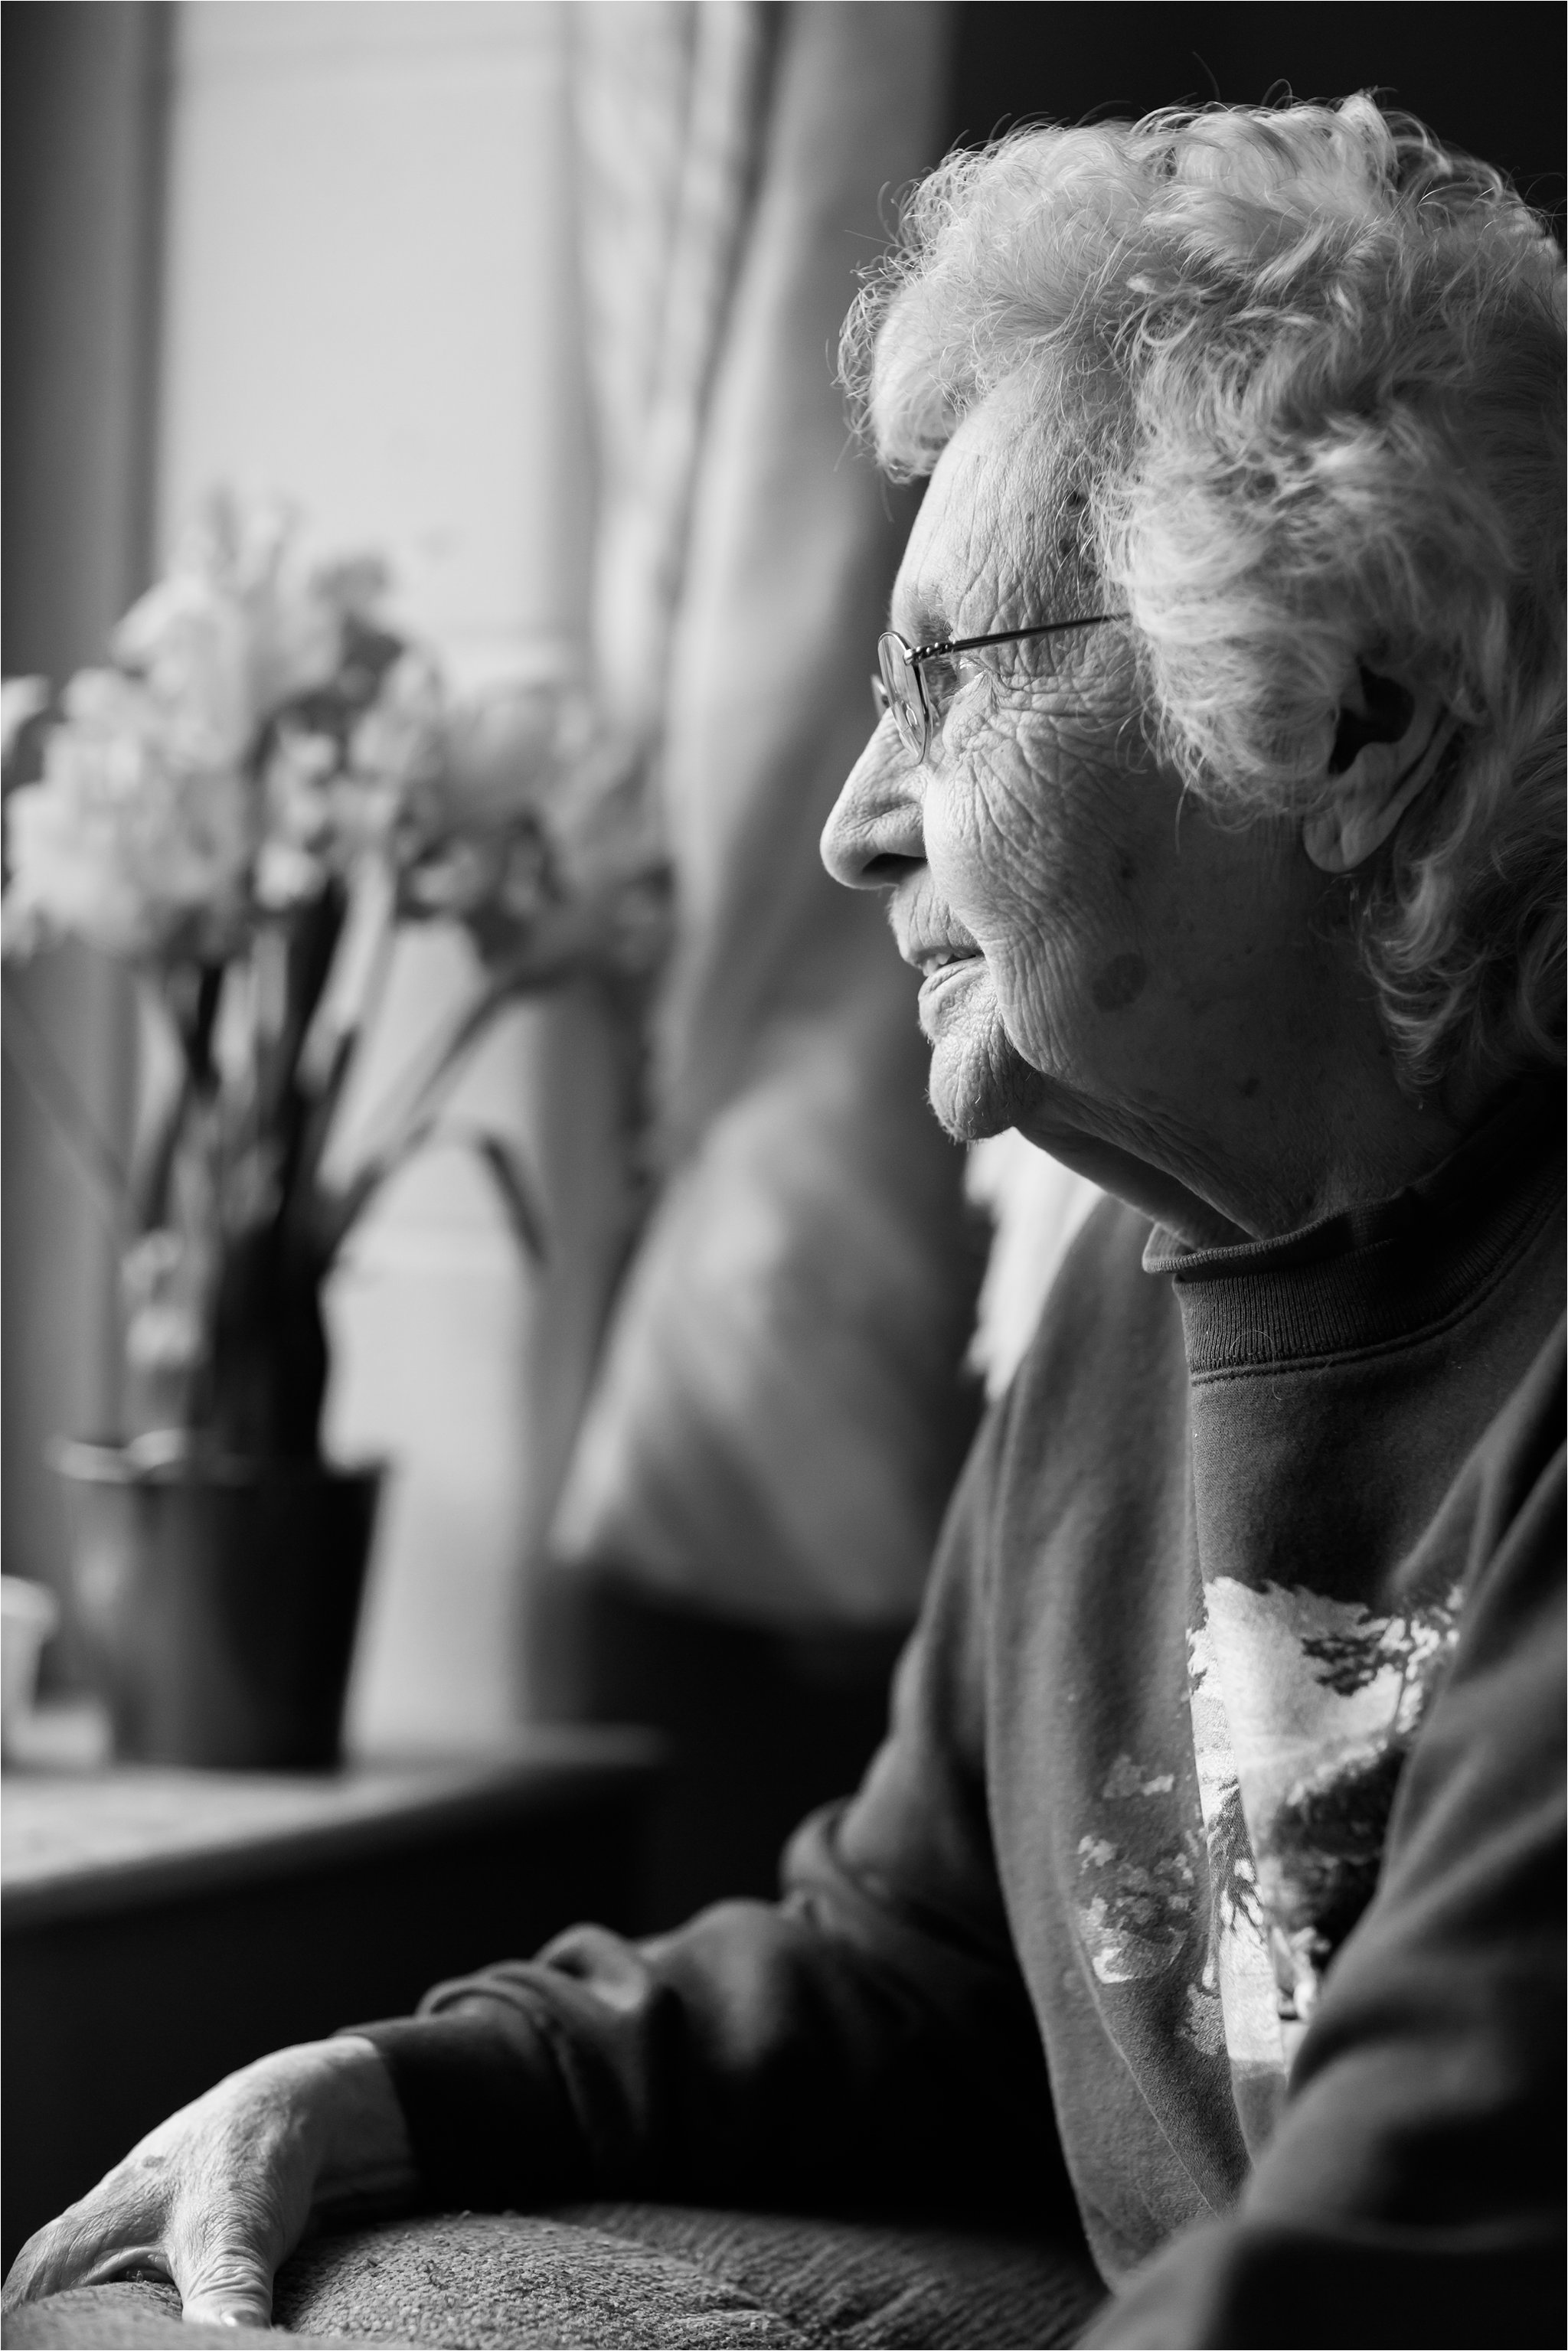 Black and White Portrait of Elderly Woman at Window